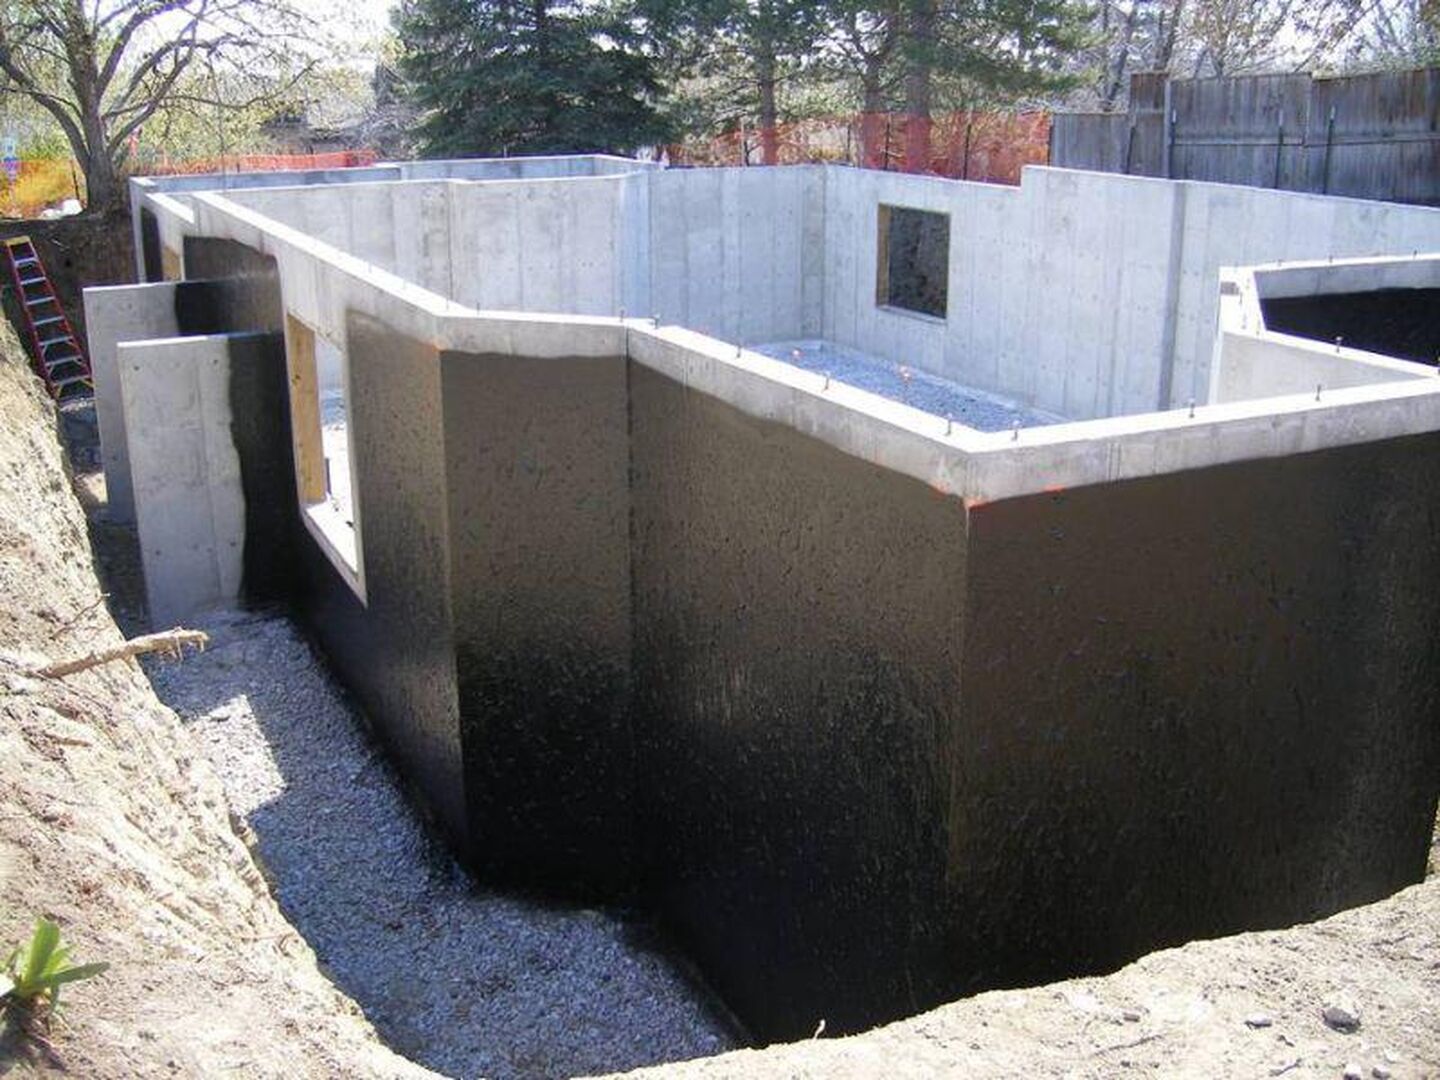 Effective basement waterproofing techniques being applied in a Massillon, Ohio home, showcasing modern solutions for local weather challenges